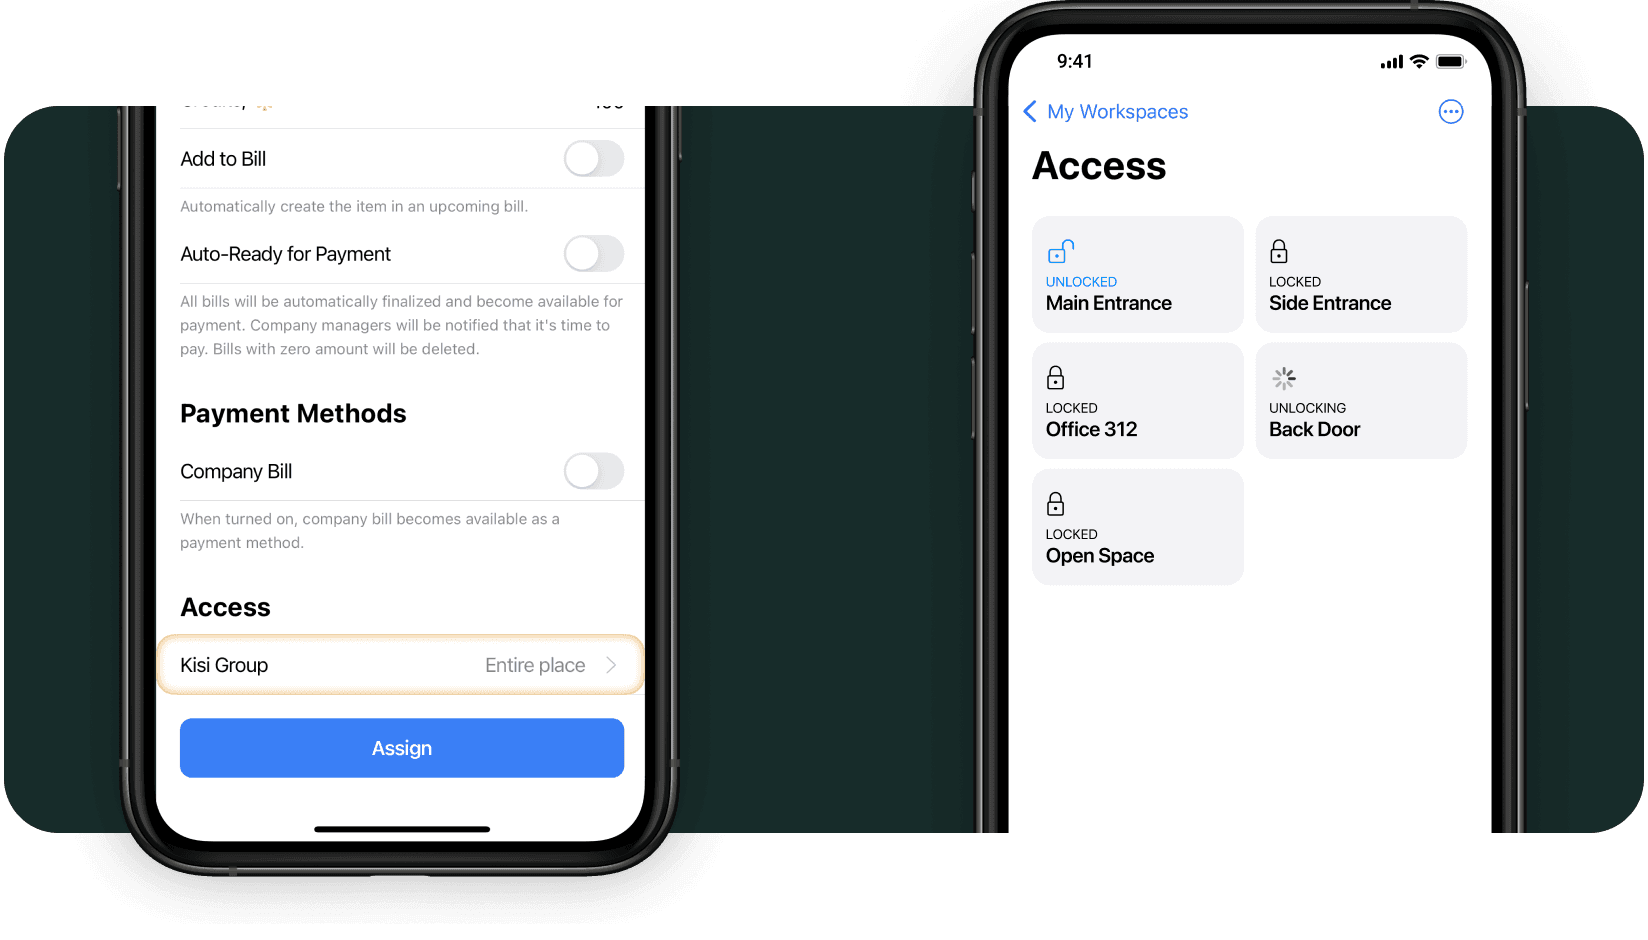 access control system integrated with andcards coworking software enables to grant access according to membership plans and open doors at a workspace with a smartphone